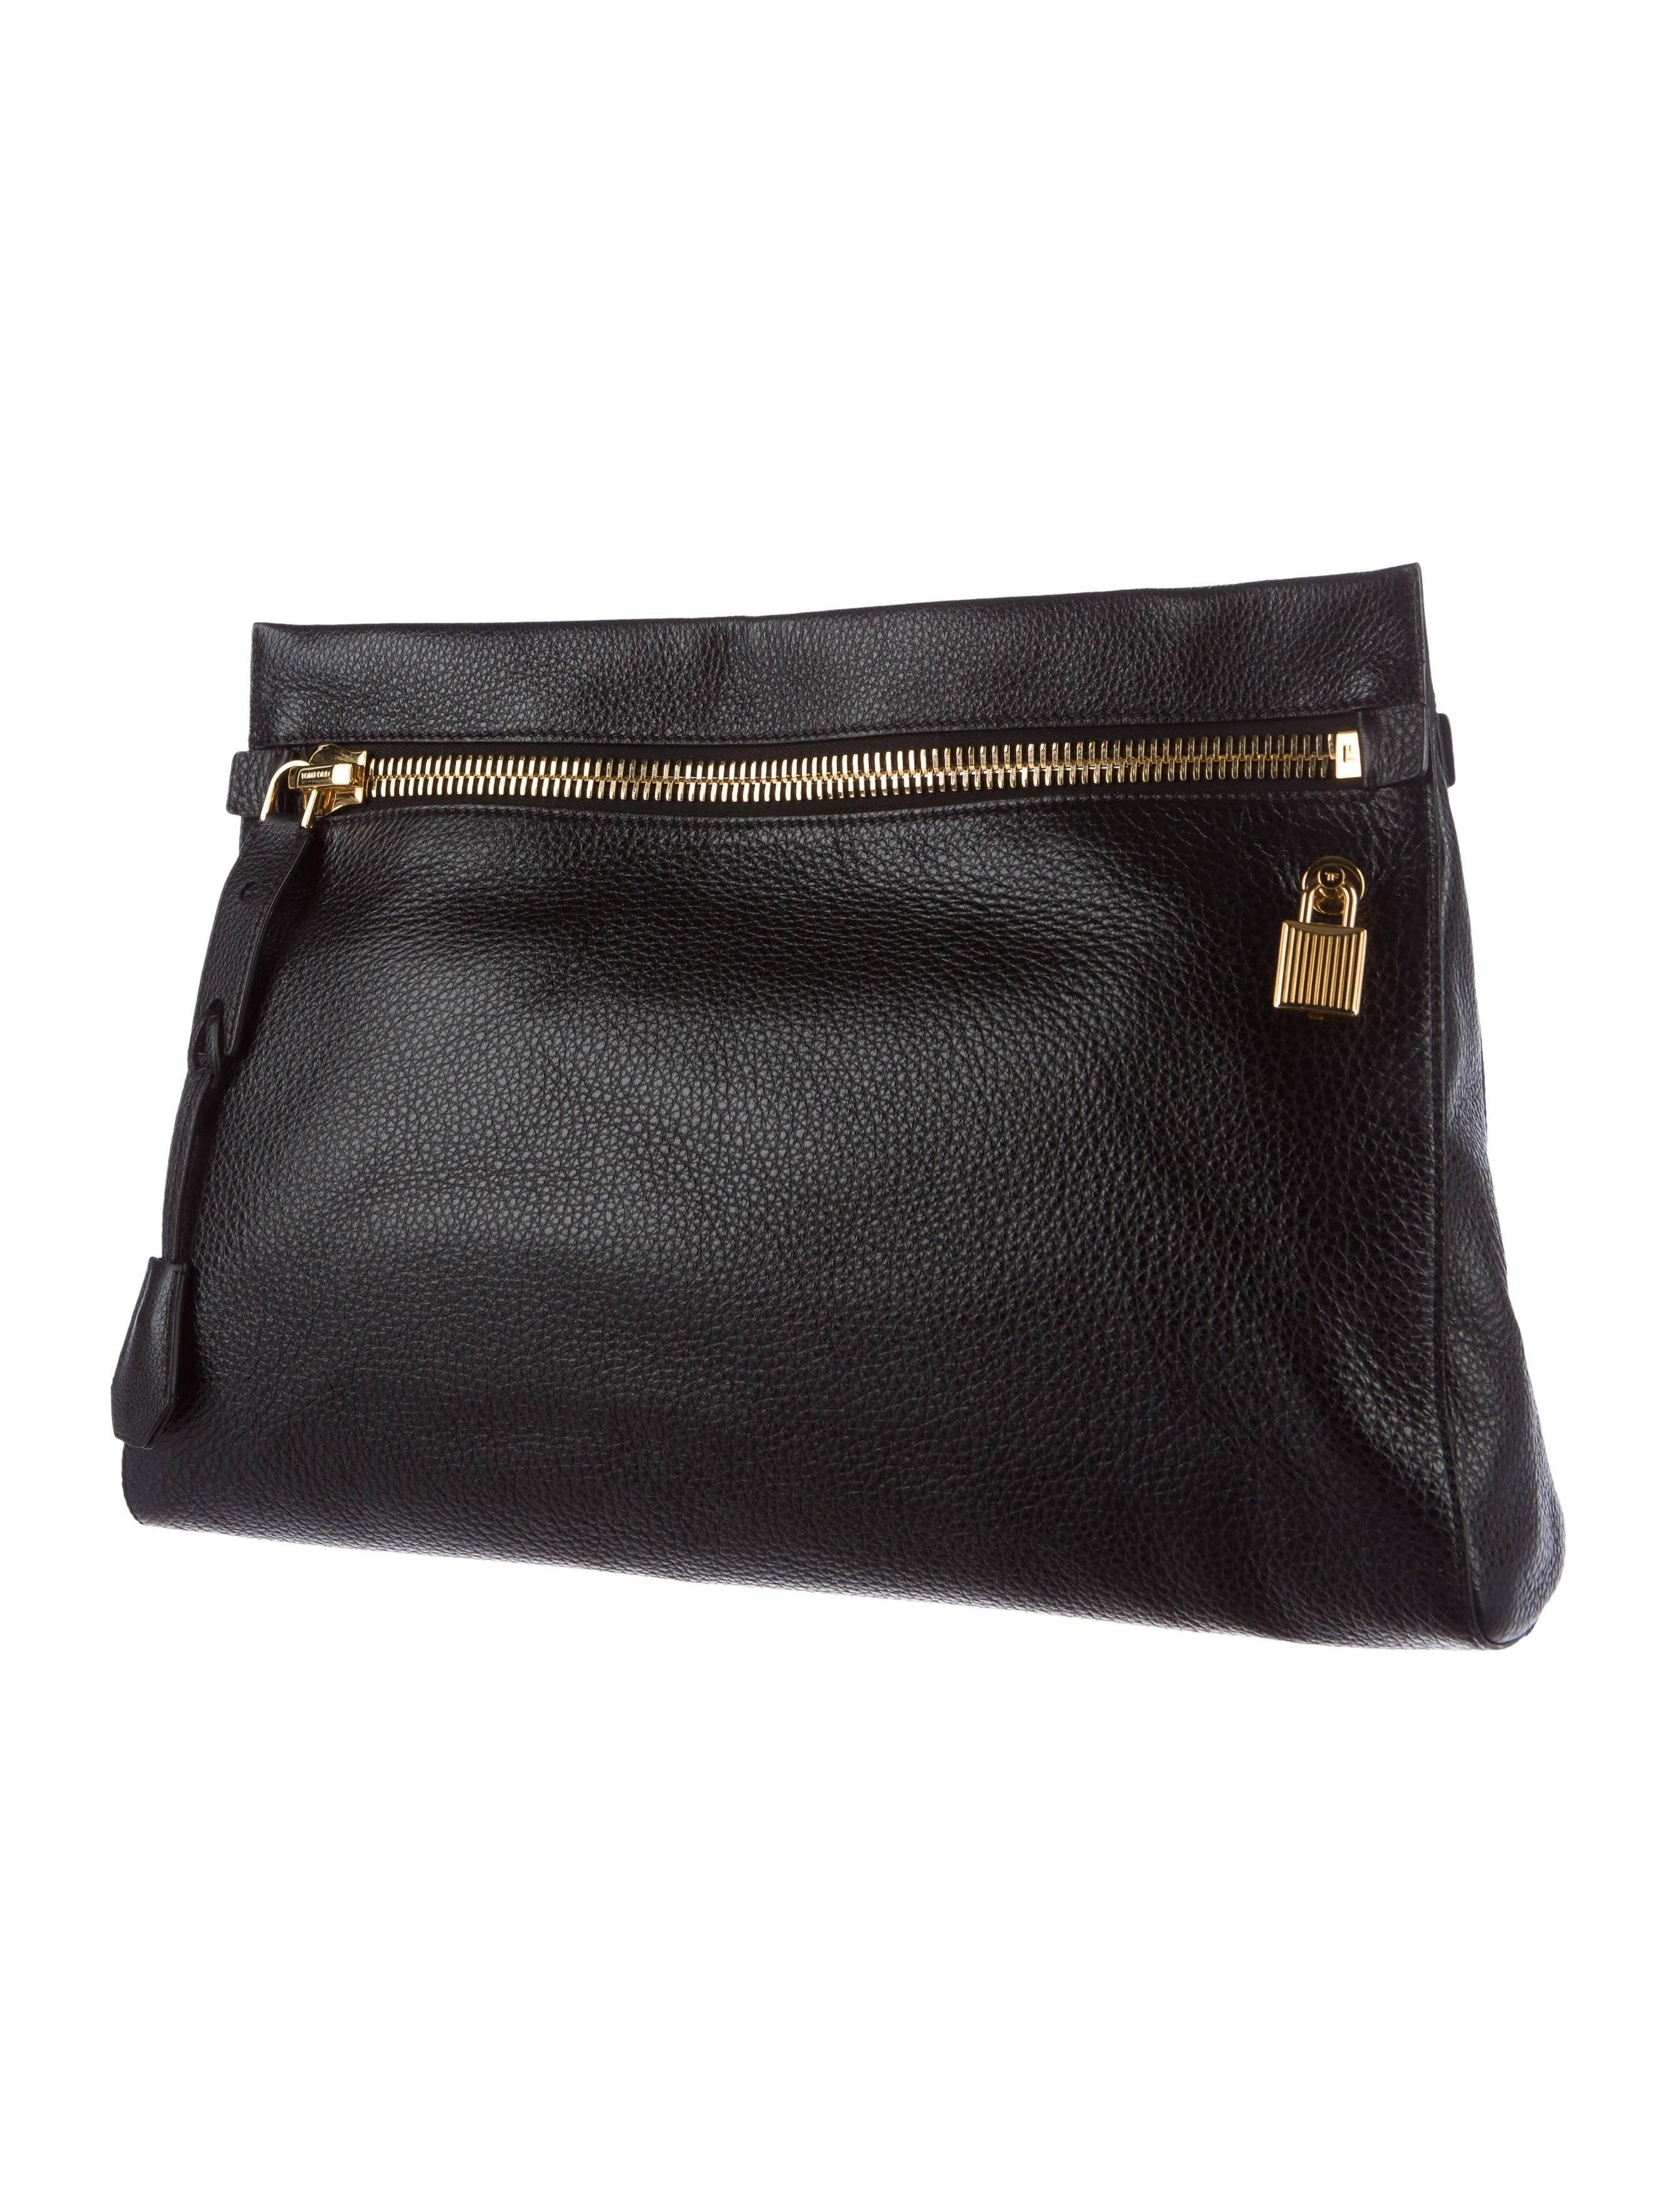 Women's Tom Ford Black Leather Gold Zip Large Envelope Evening Clutch with Accessories